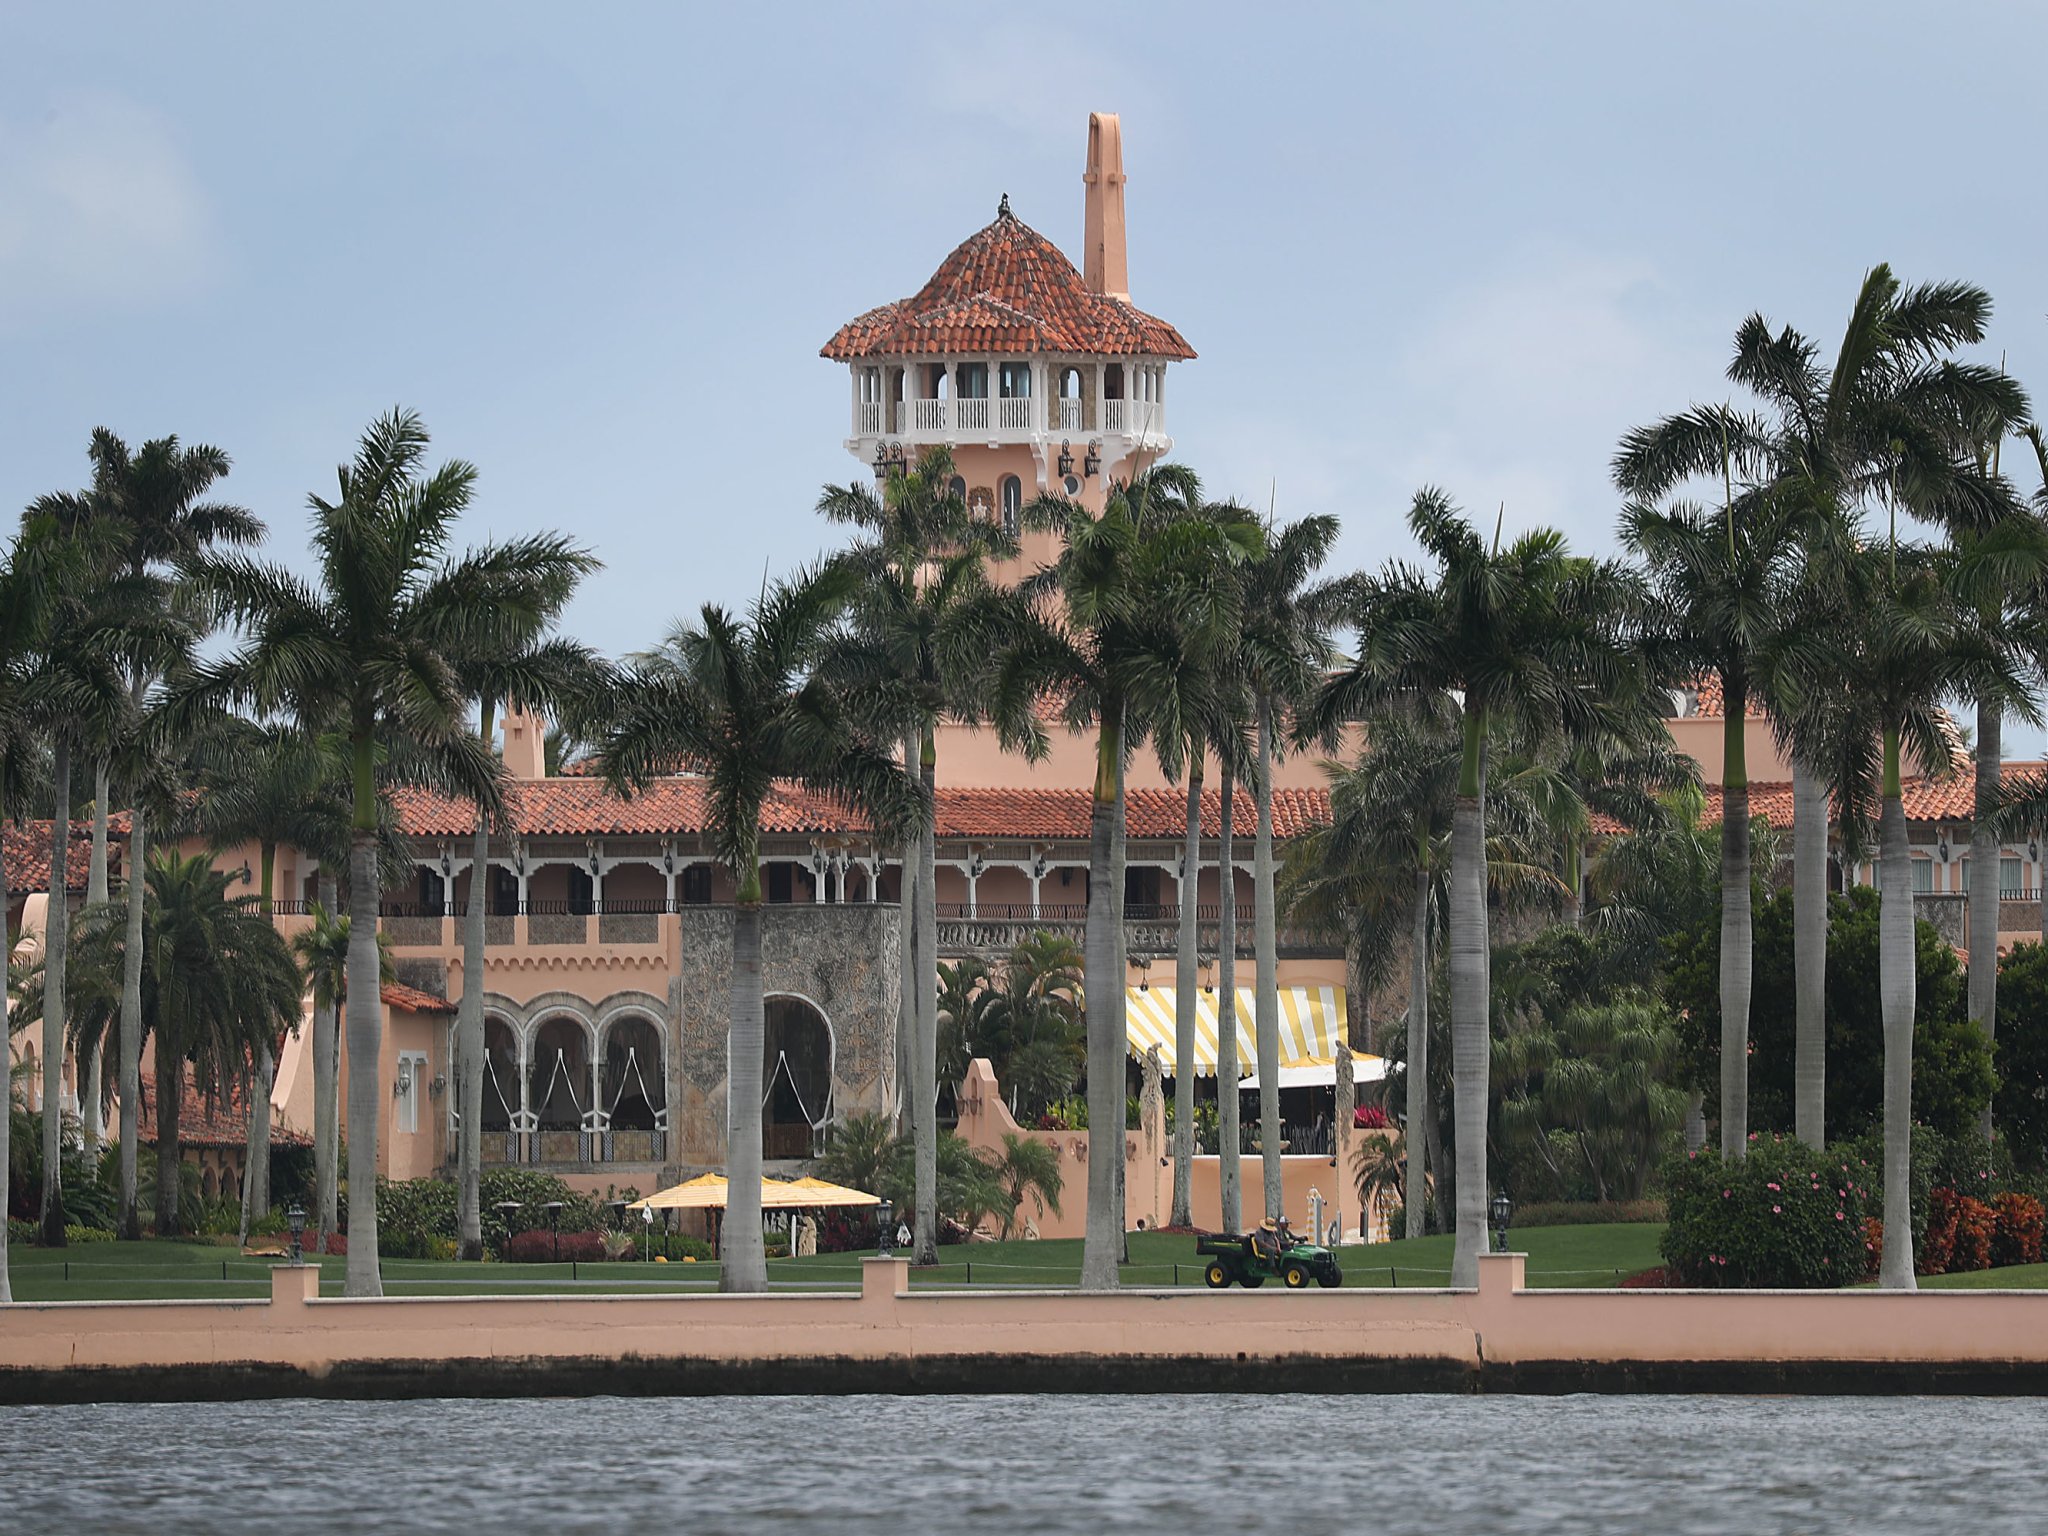 The wild and opulent history of Mar-a-Lago